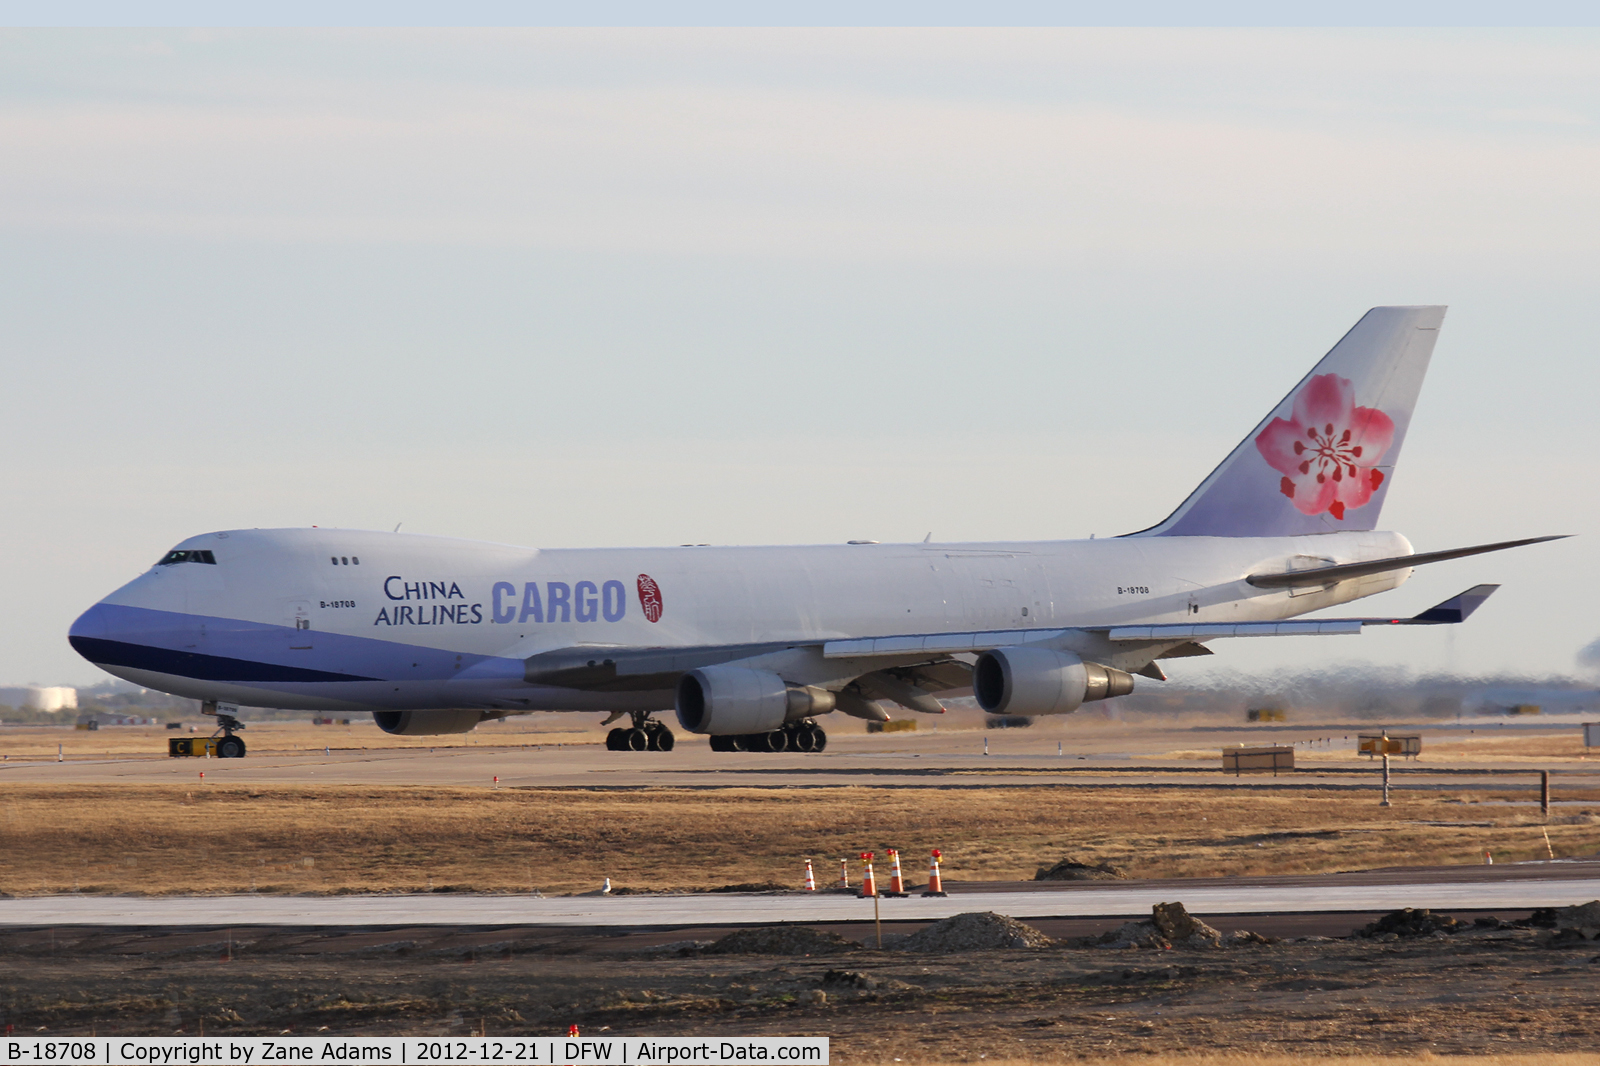 B-18708, 2001 Boeing 747-409F/SCD C/N 30765, China Airlines Cargo 747 at DFW